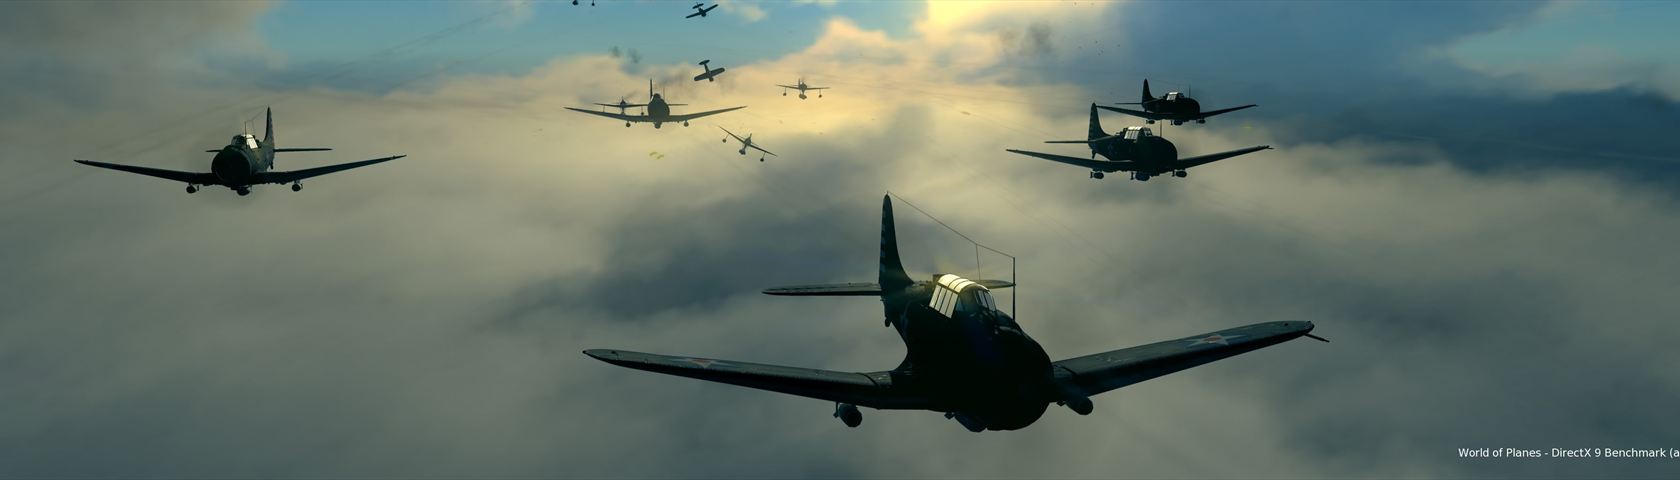 WWII Planes